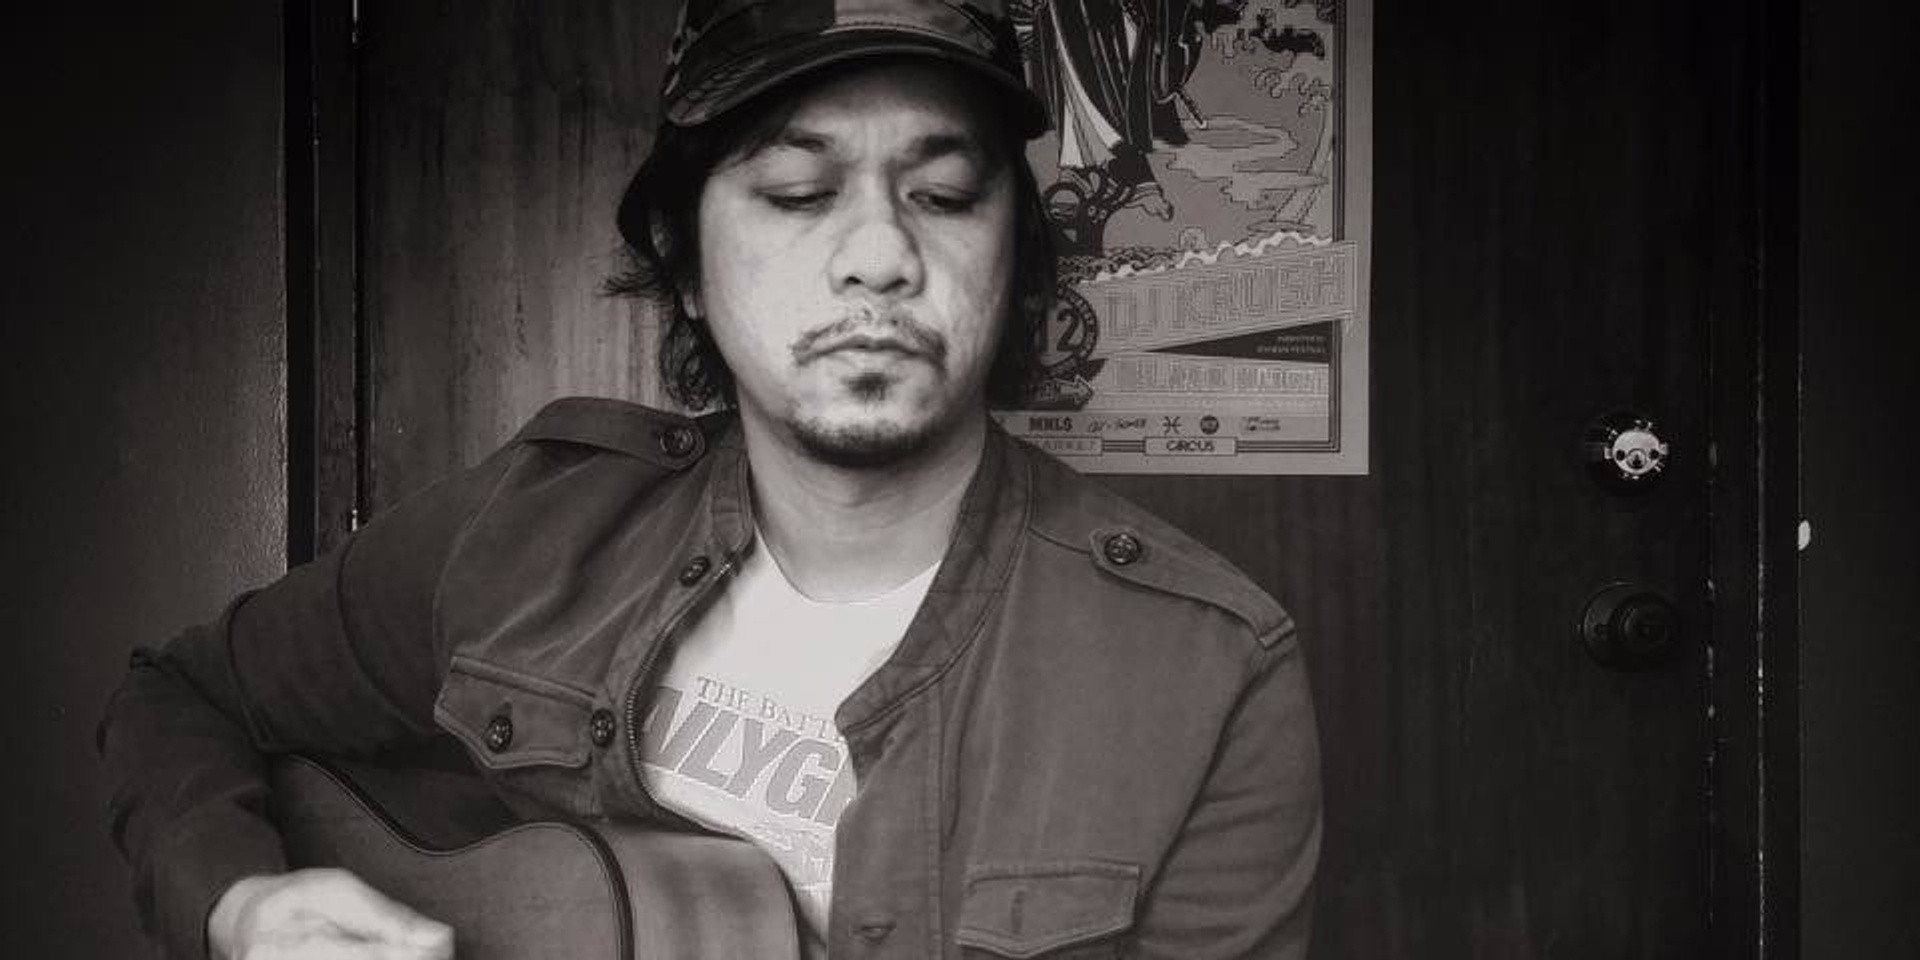 D&D Custom Guitars to release signature acoustic guitar with Raymund Marasigan